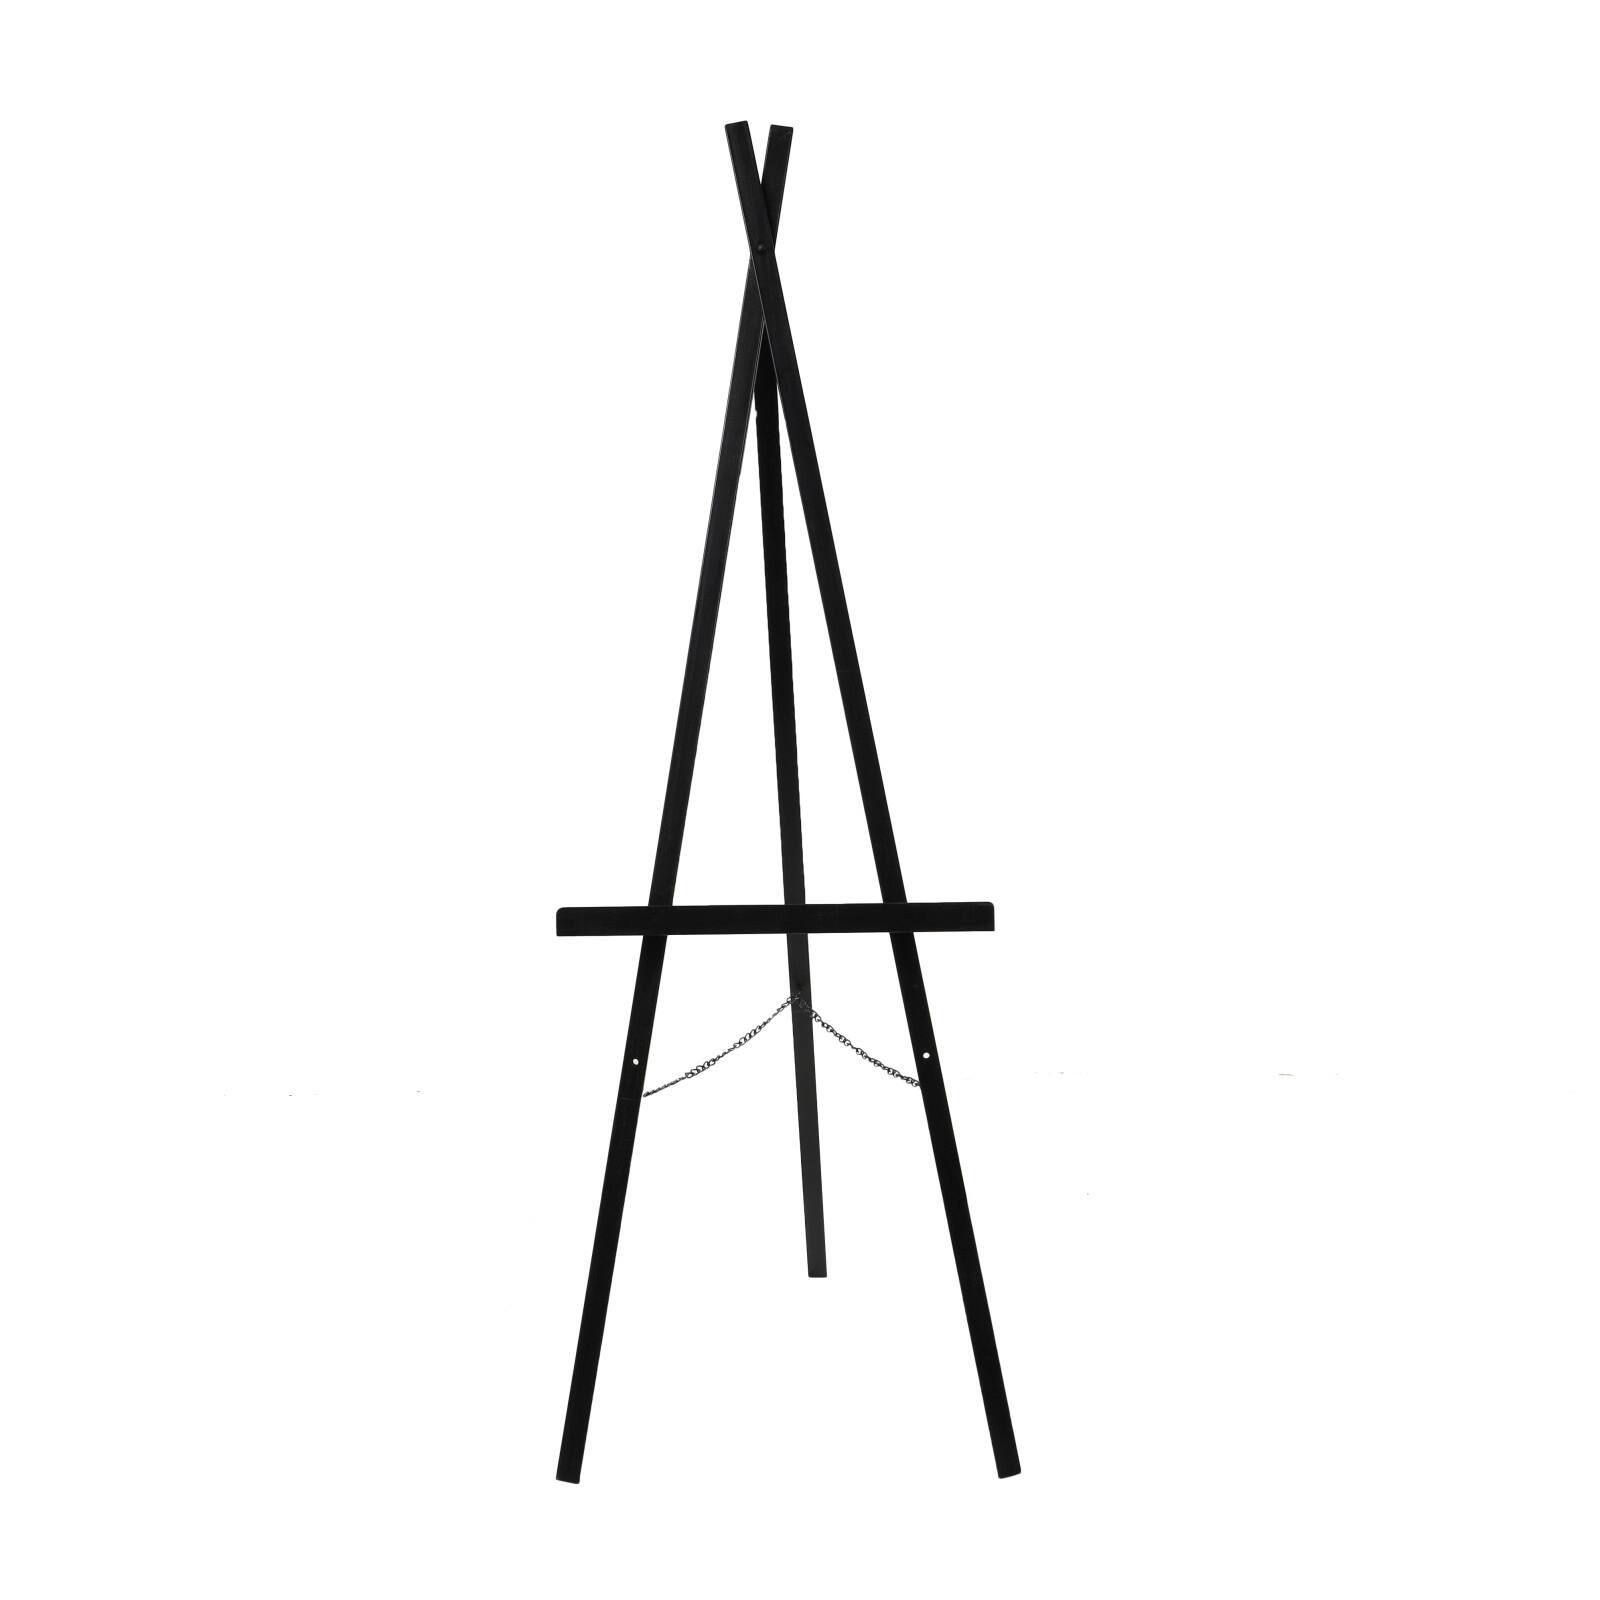 Arteza 63 Black Steel Display Easel for Presentations, Collapsible, Portable & Adjustable - 3 Pack